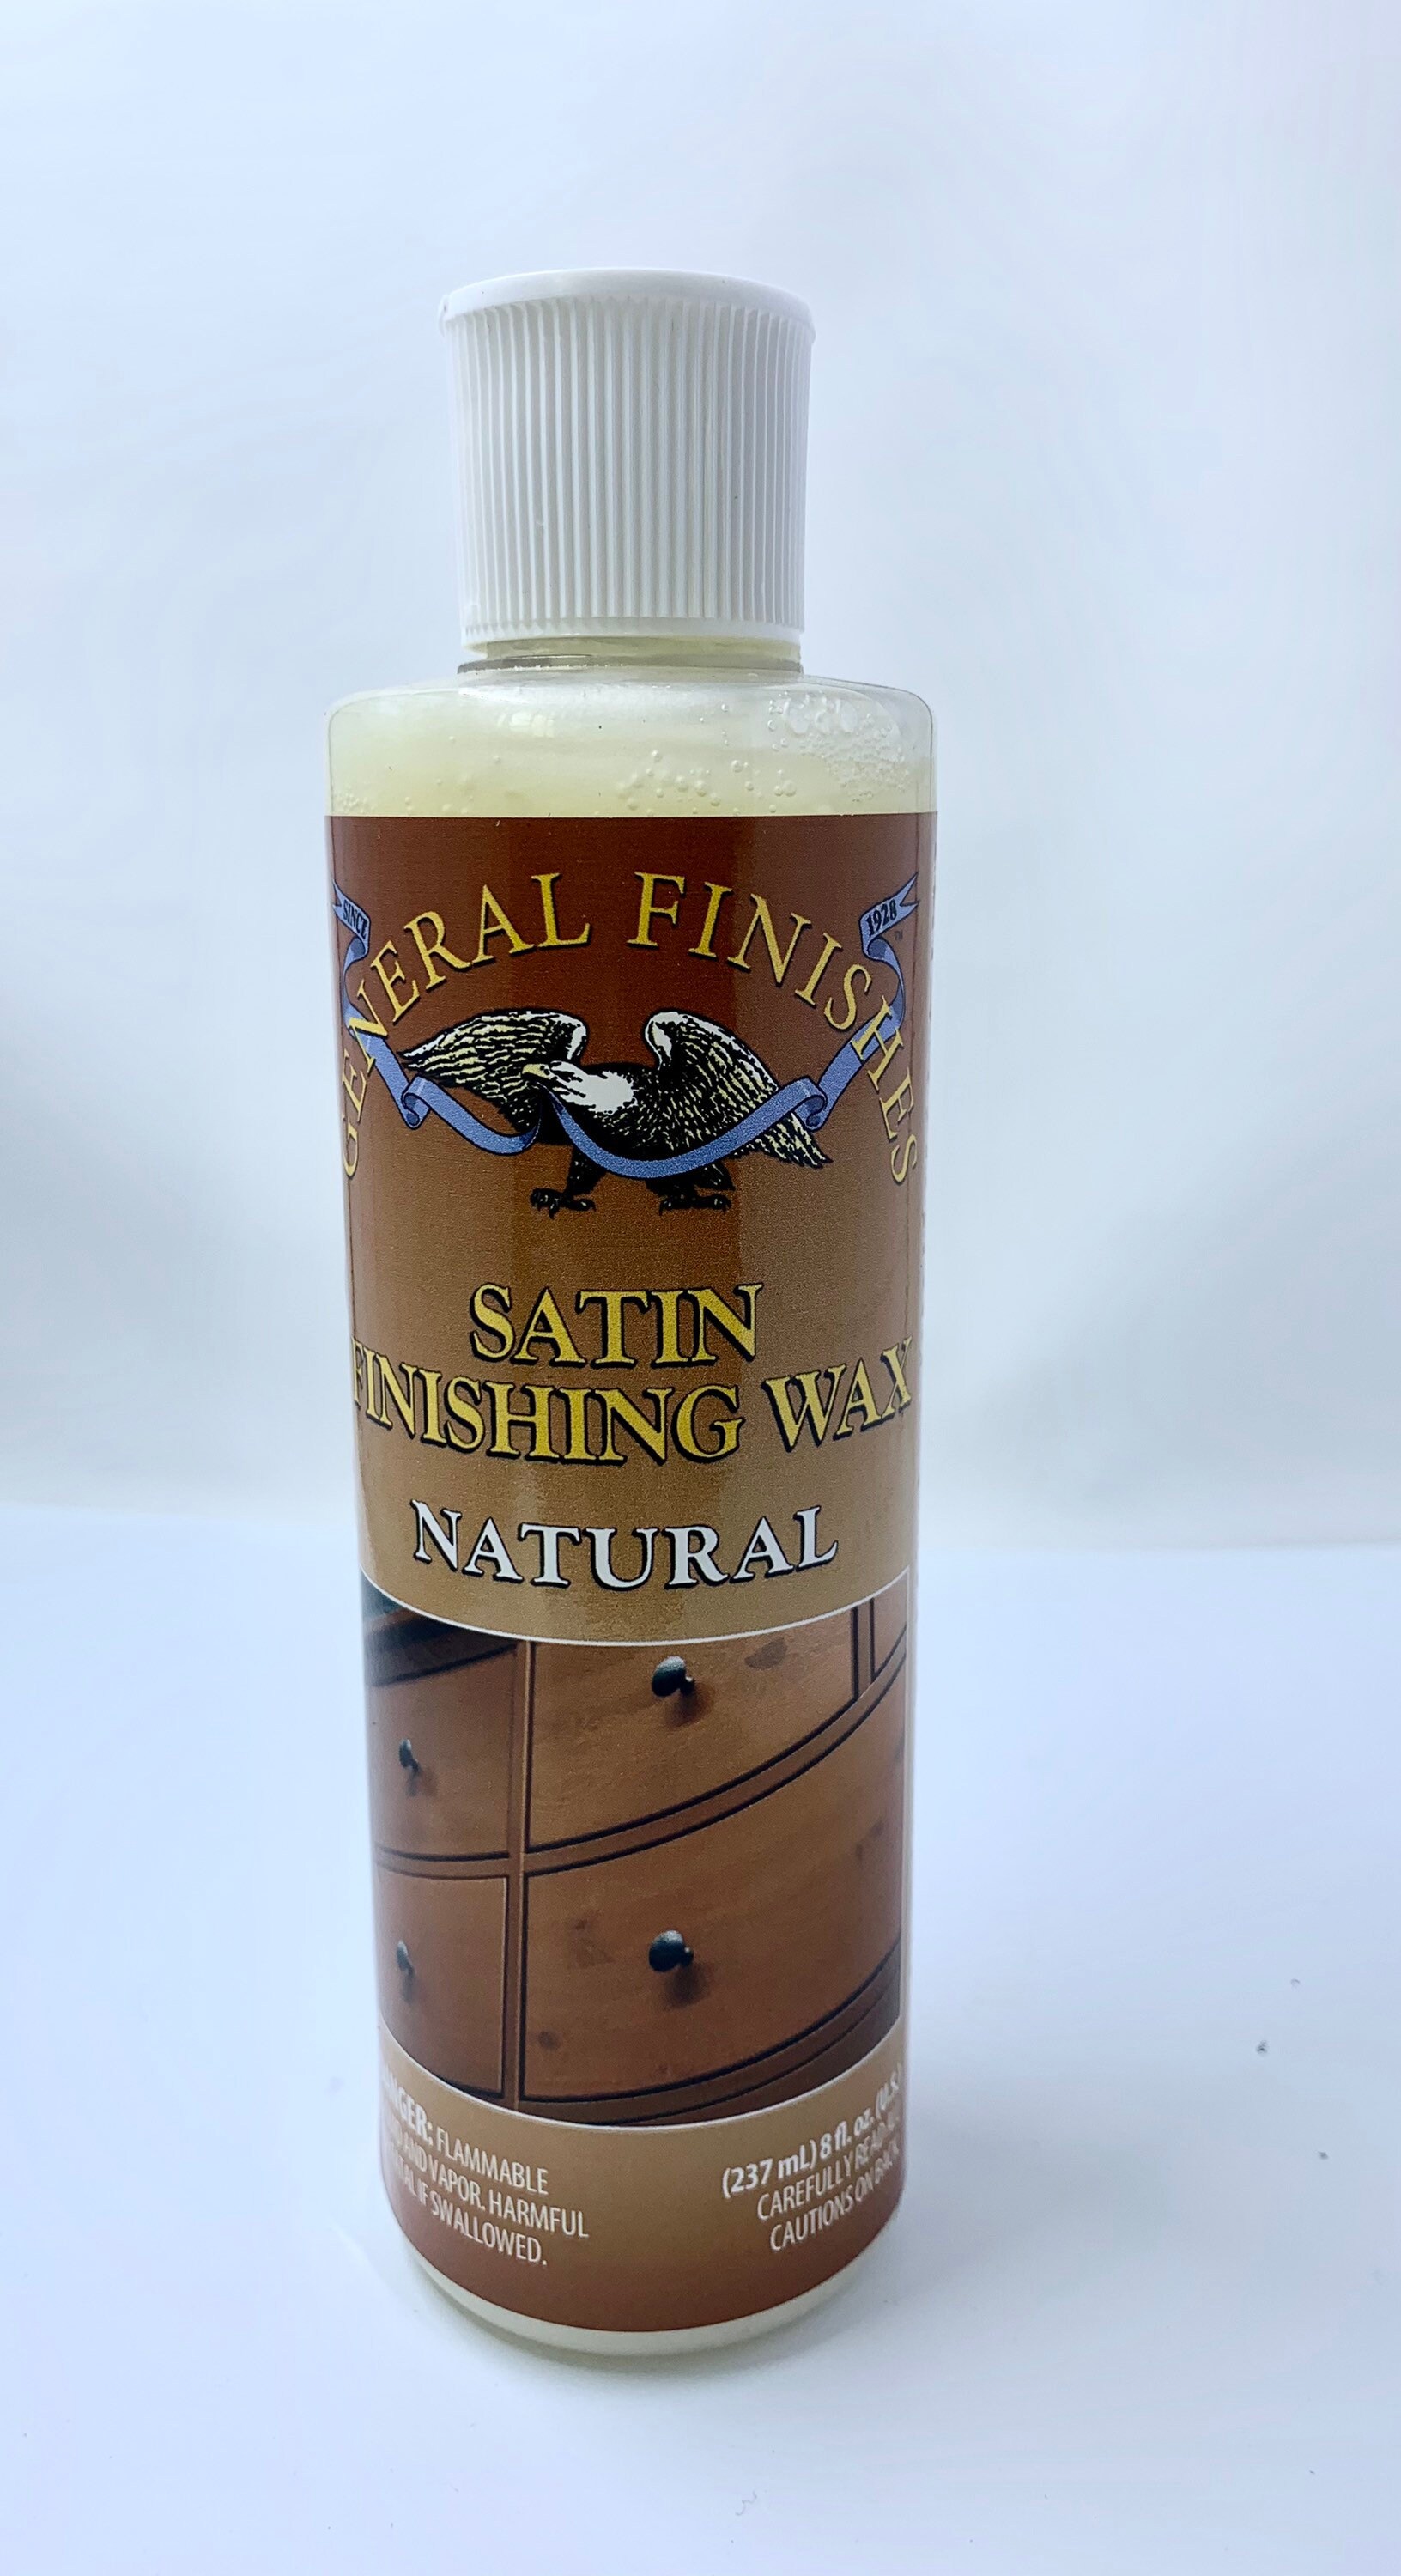 General Finishes Satin Finishing Wax 8oz - The Compleat Sculptor